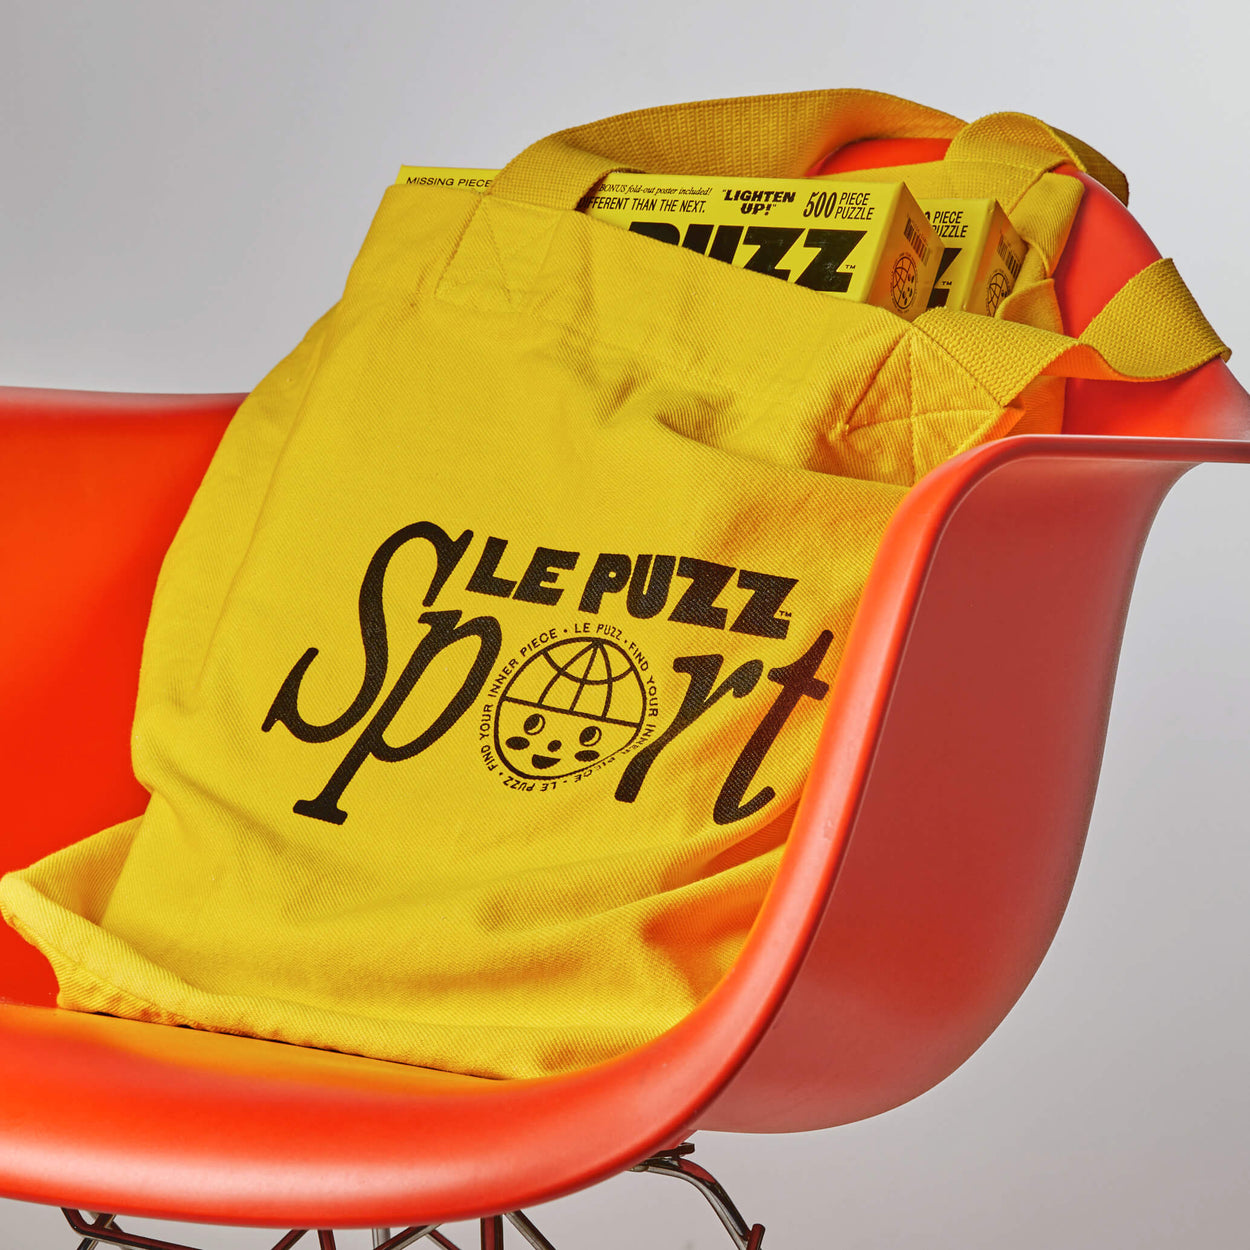 The Big Big Yellow Puzzle Bag from Le Puzz